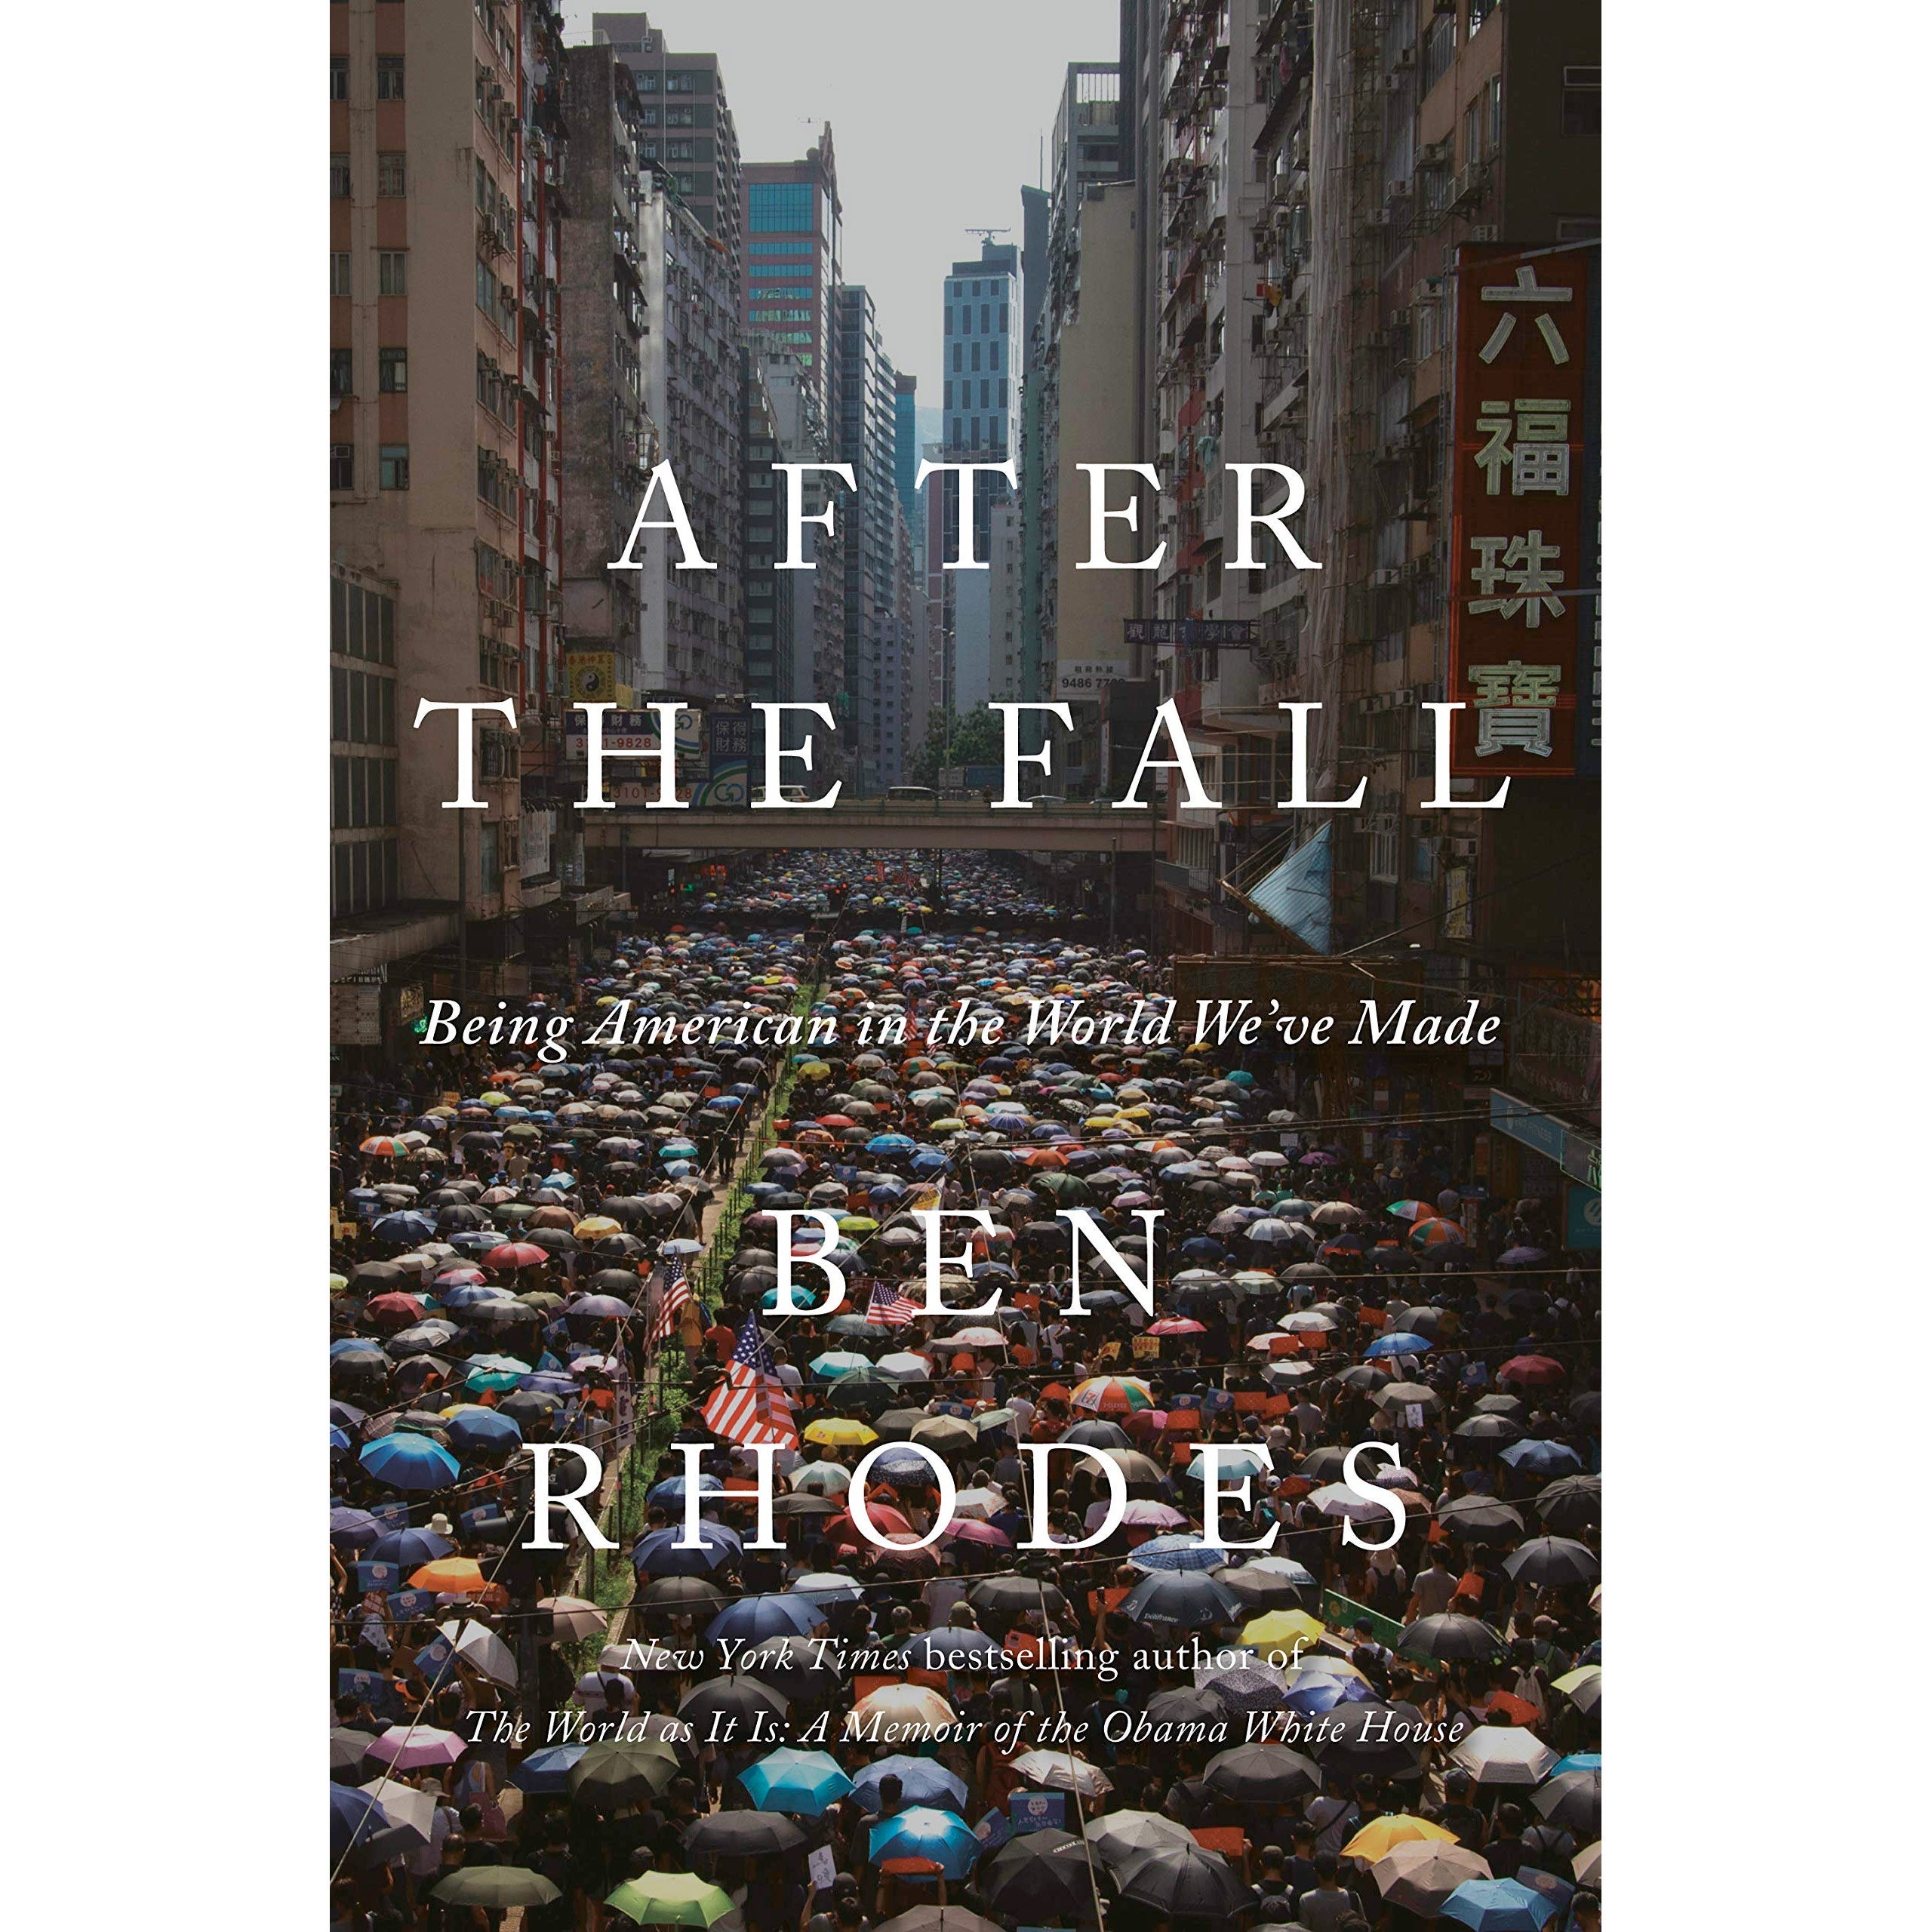 After the Fall book cover featuring a sea of protesters under umbrellas in Hong Kong